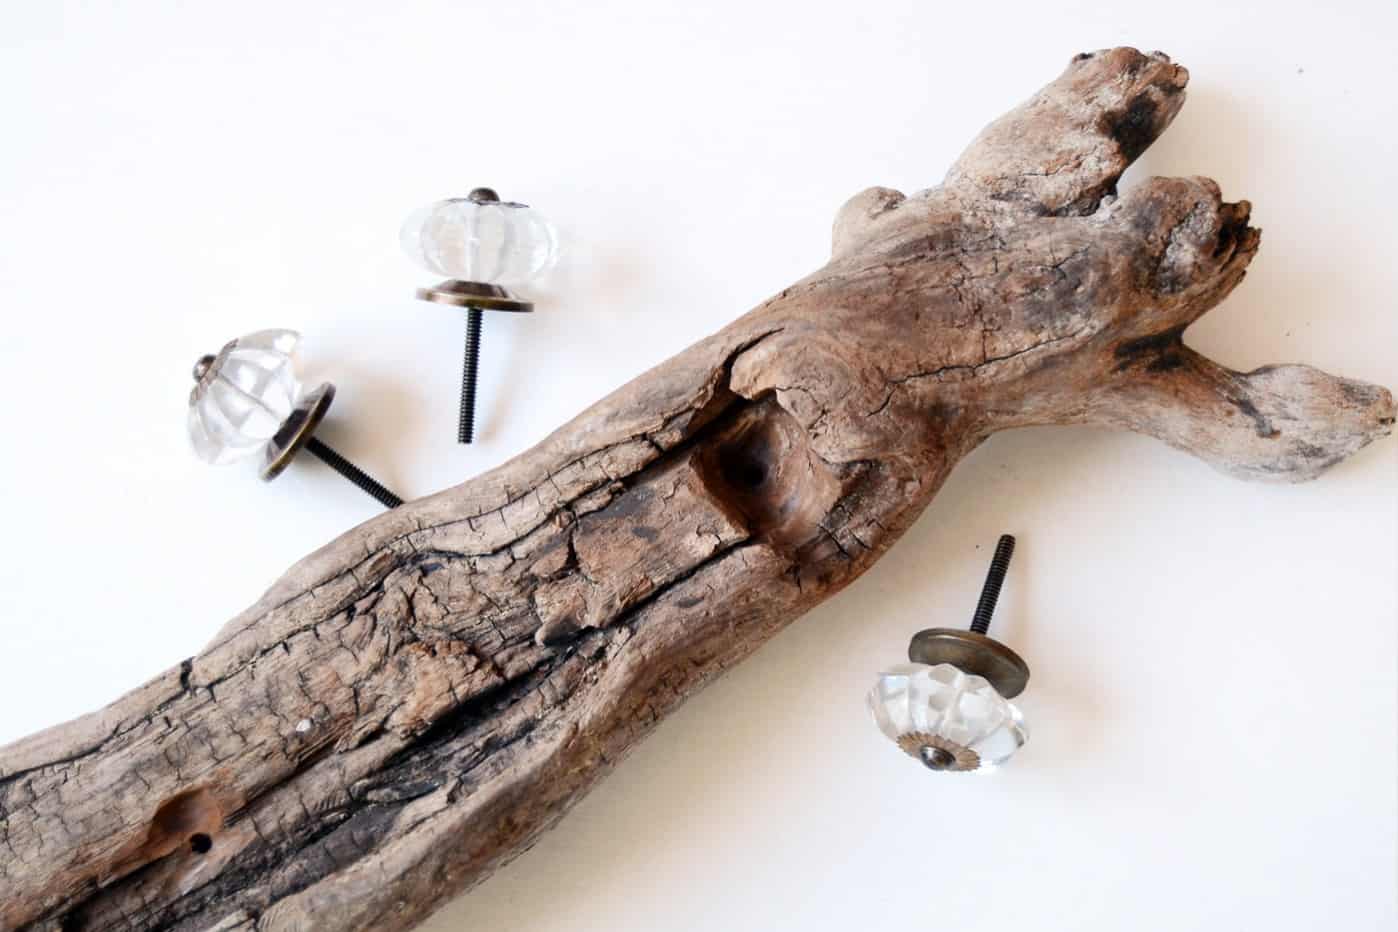 DIY Necklace Hanger from Driftwood or a Giant Cane Root - Cucicucicoo